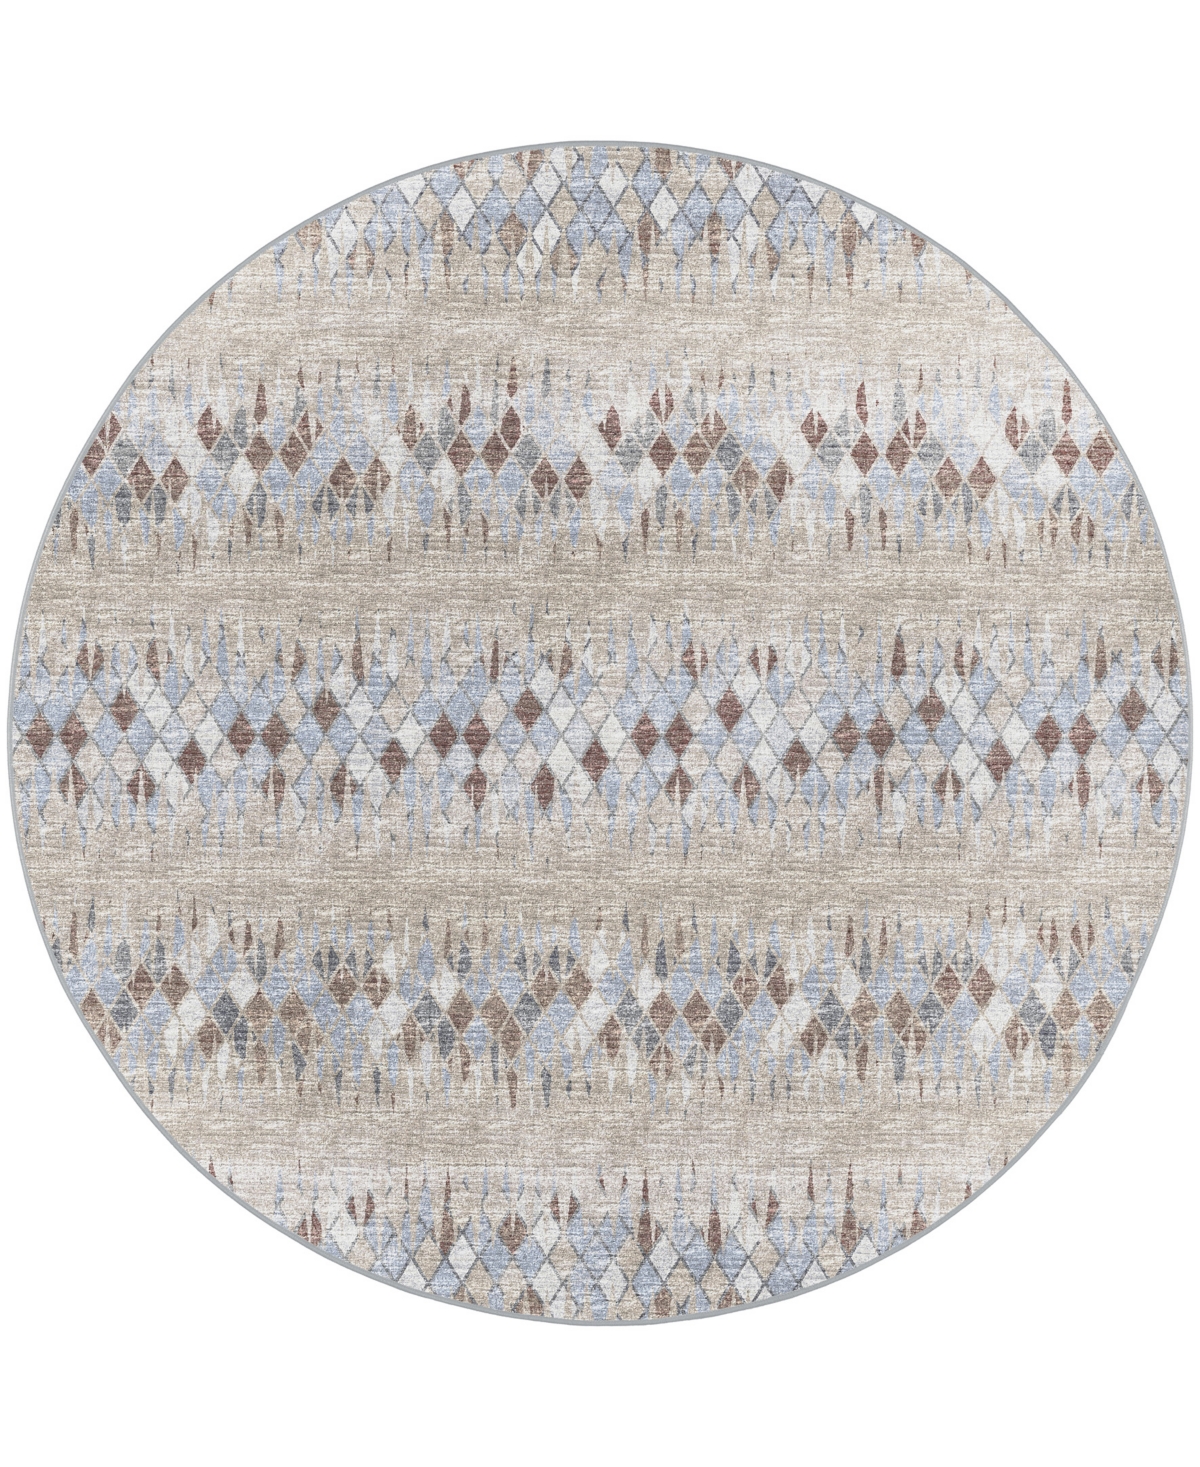 D Style Briggs Brg-5 6' x 6' Round Area Rug - Taupe